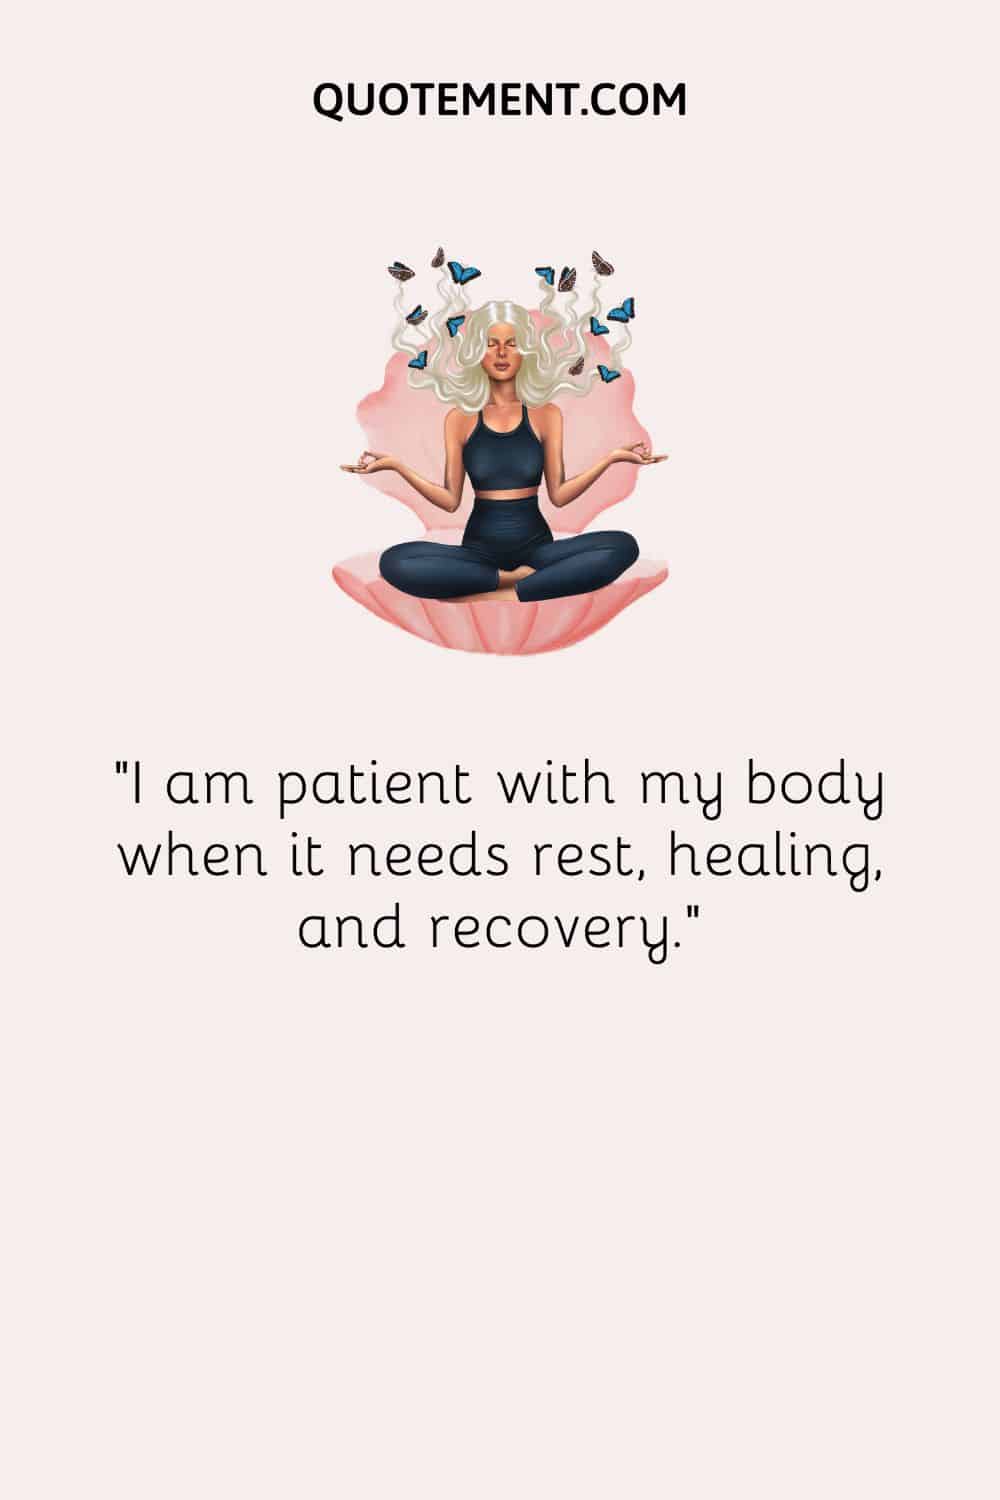 I am patient with my body when it needs rest, healing, and recovery.